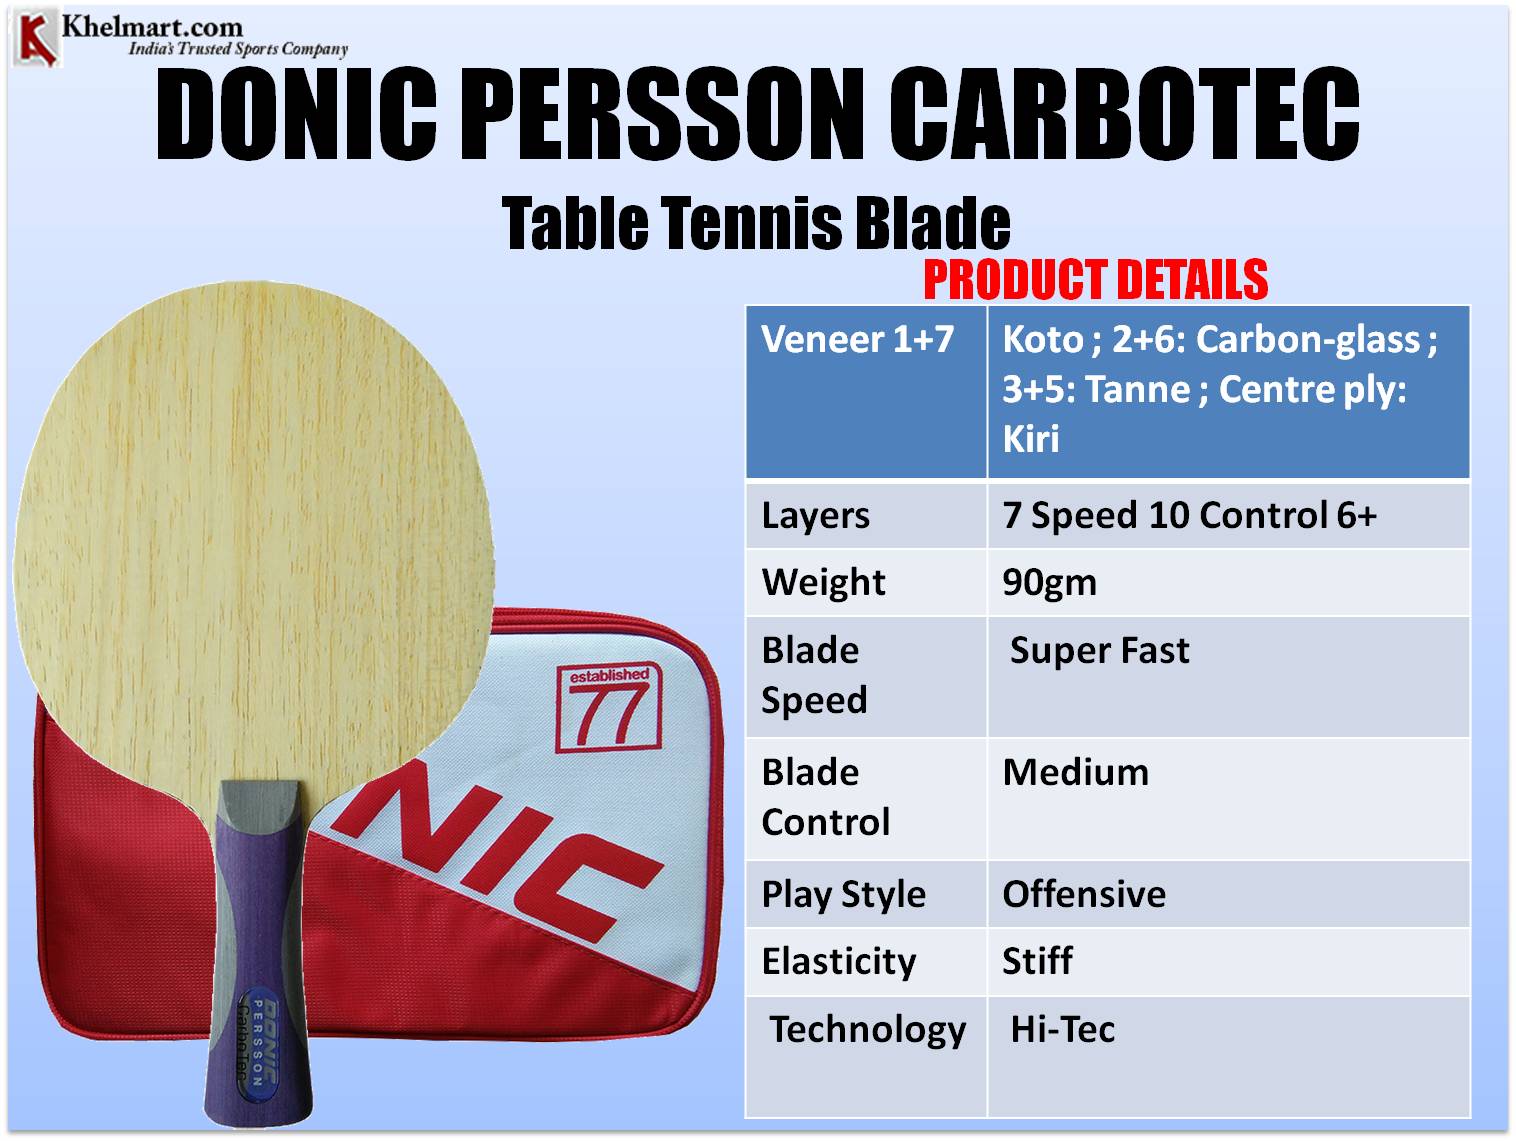 DONIC_PERSSON_CARBOTEC_Table_Tennis_Blade.jpg